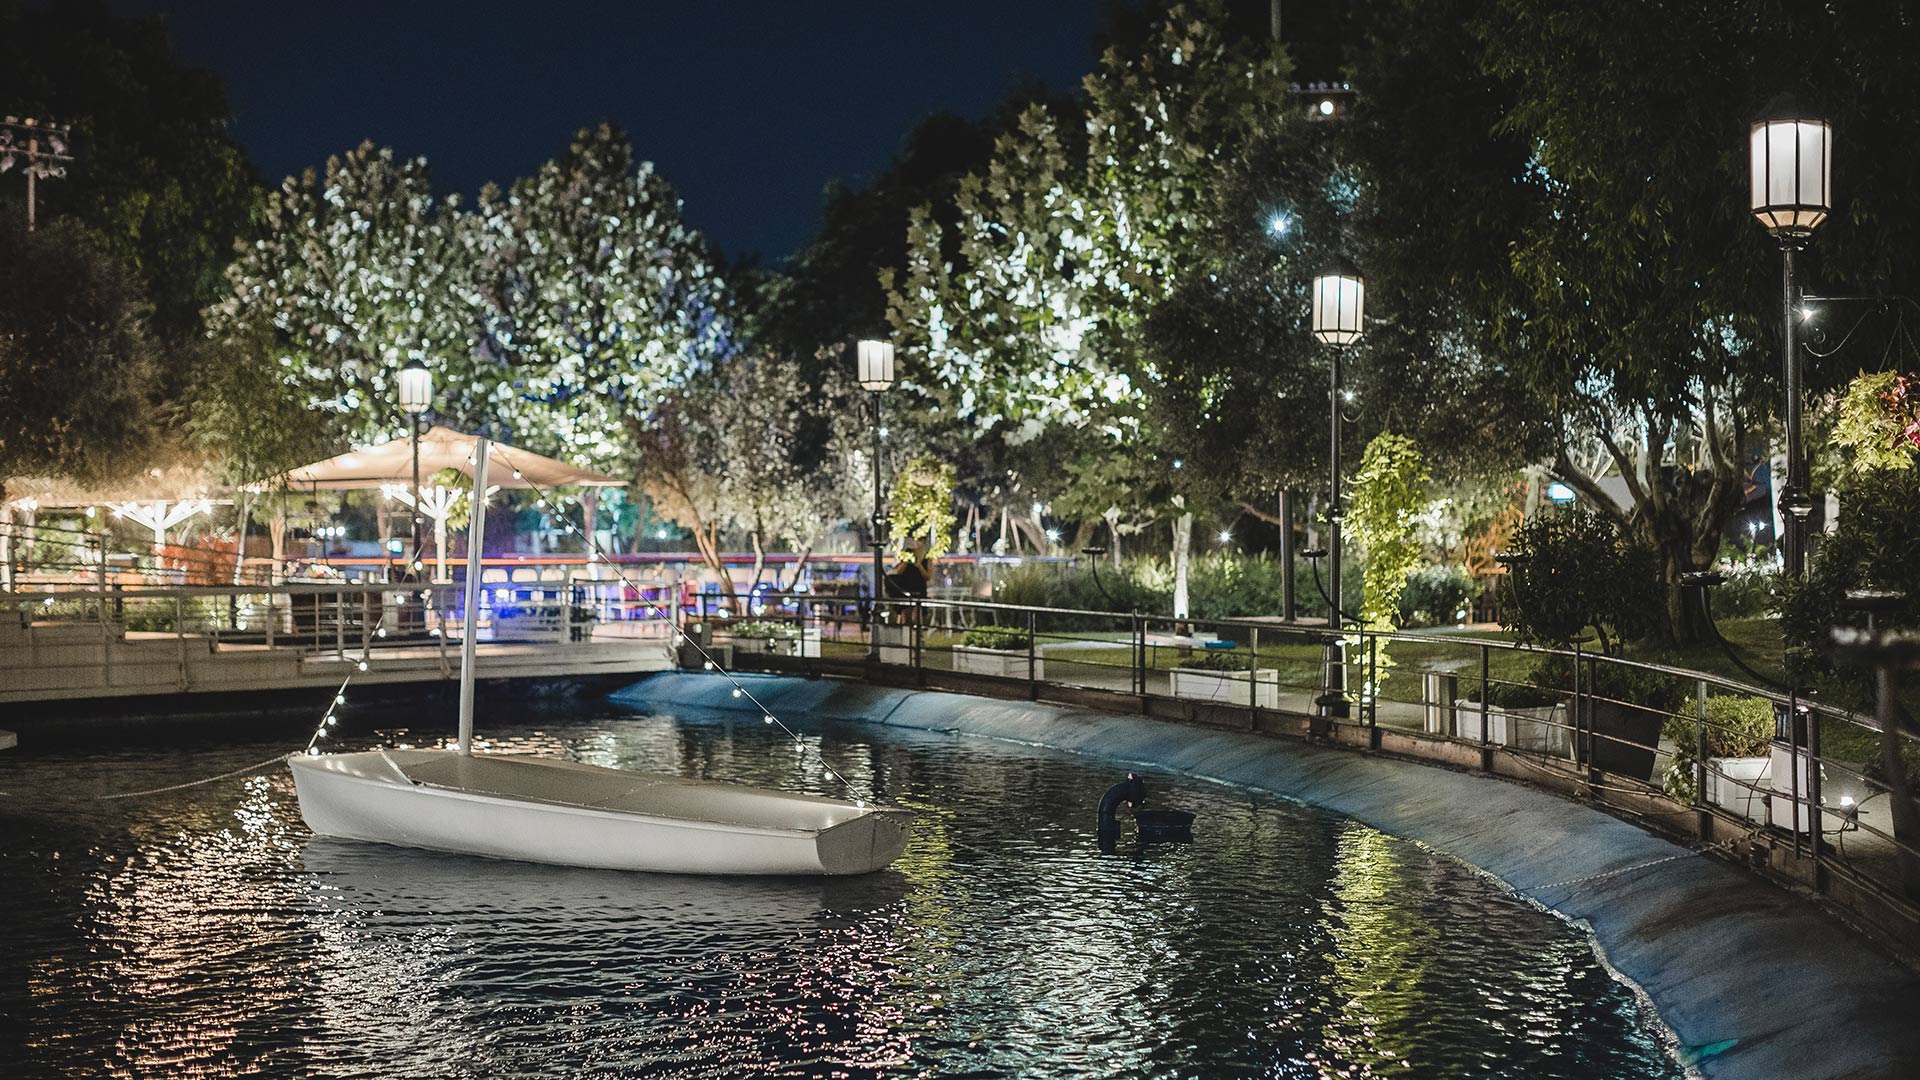 White boat lit up in a pool of water surrounded by lighting poles and illuminated trees